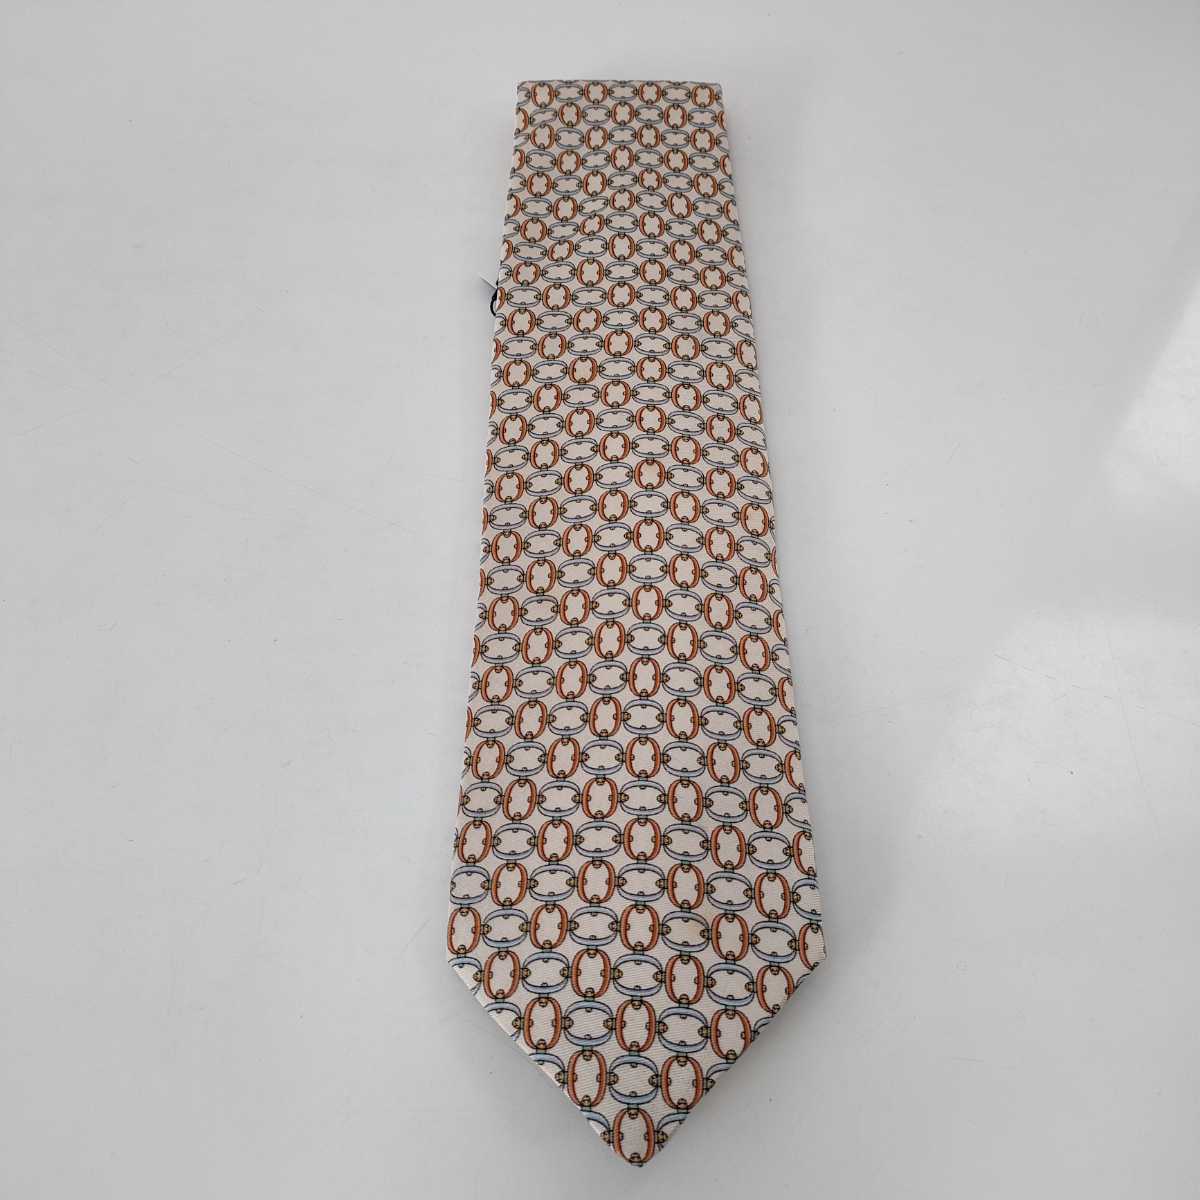  Dunhill (Dunhill) beige circle design necktie new goods unused tag attaching box attaching 